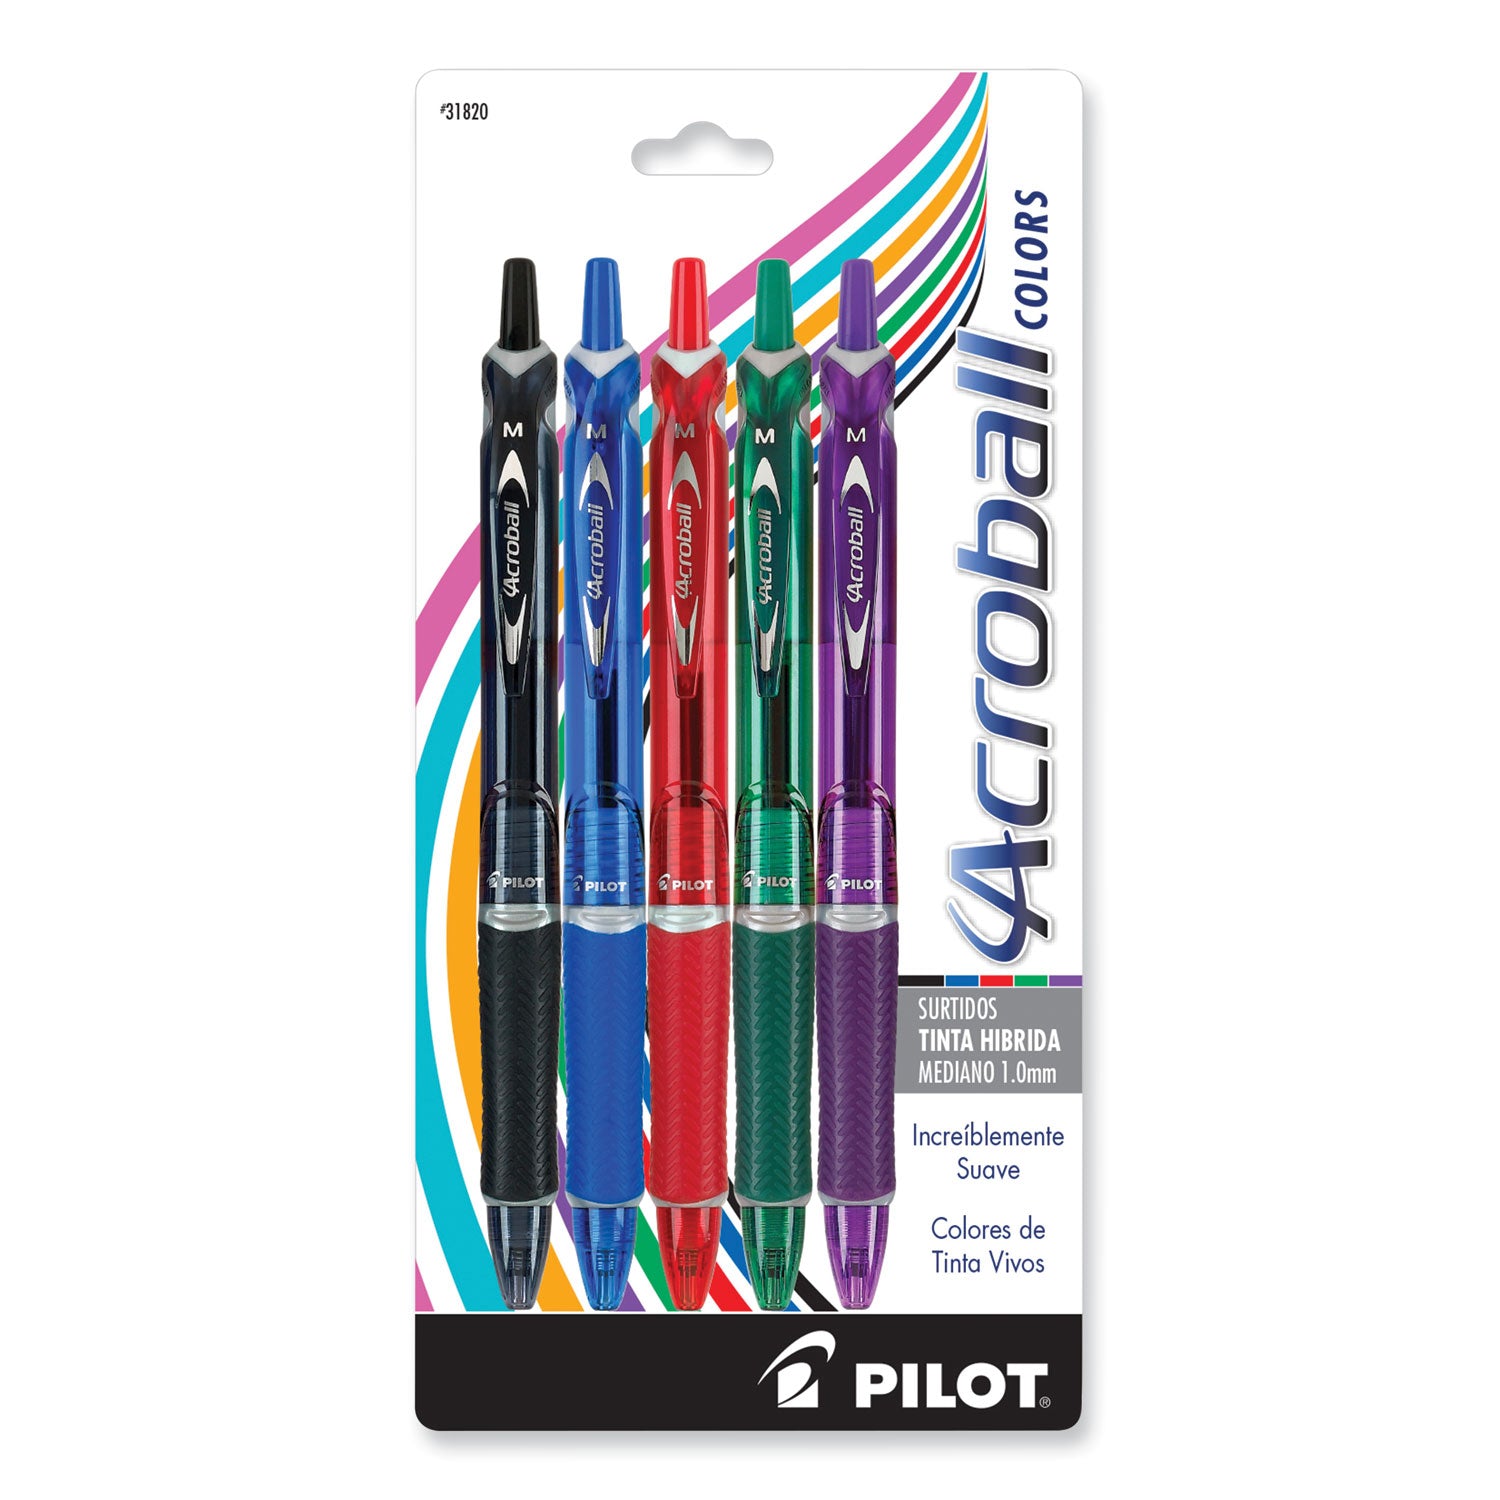 Acroball Colors Advanced Ink Hybrid Gel Pen, Retractable, Medium 1 mm, Assorted Ink and Barrel Colors, 5/Pack - 